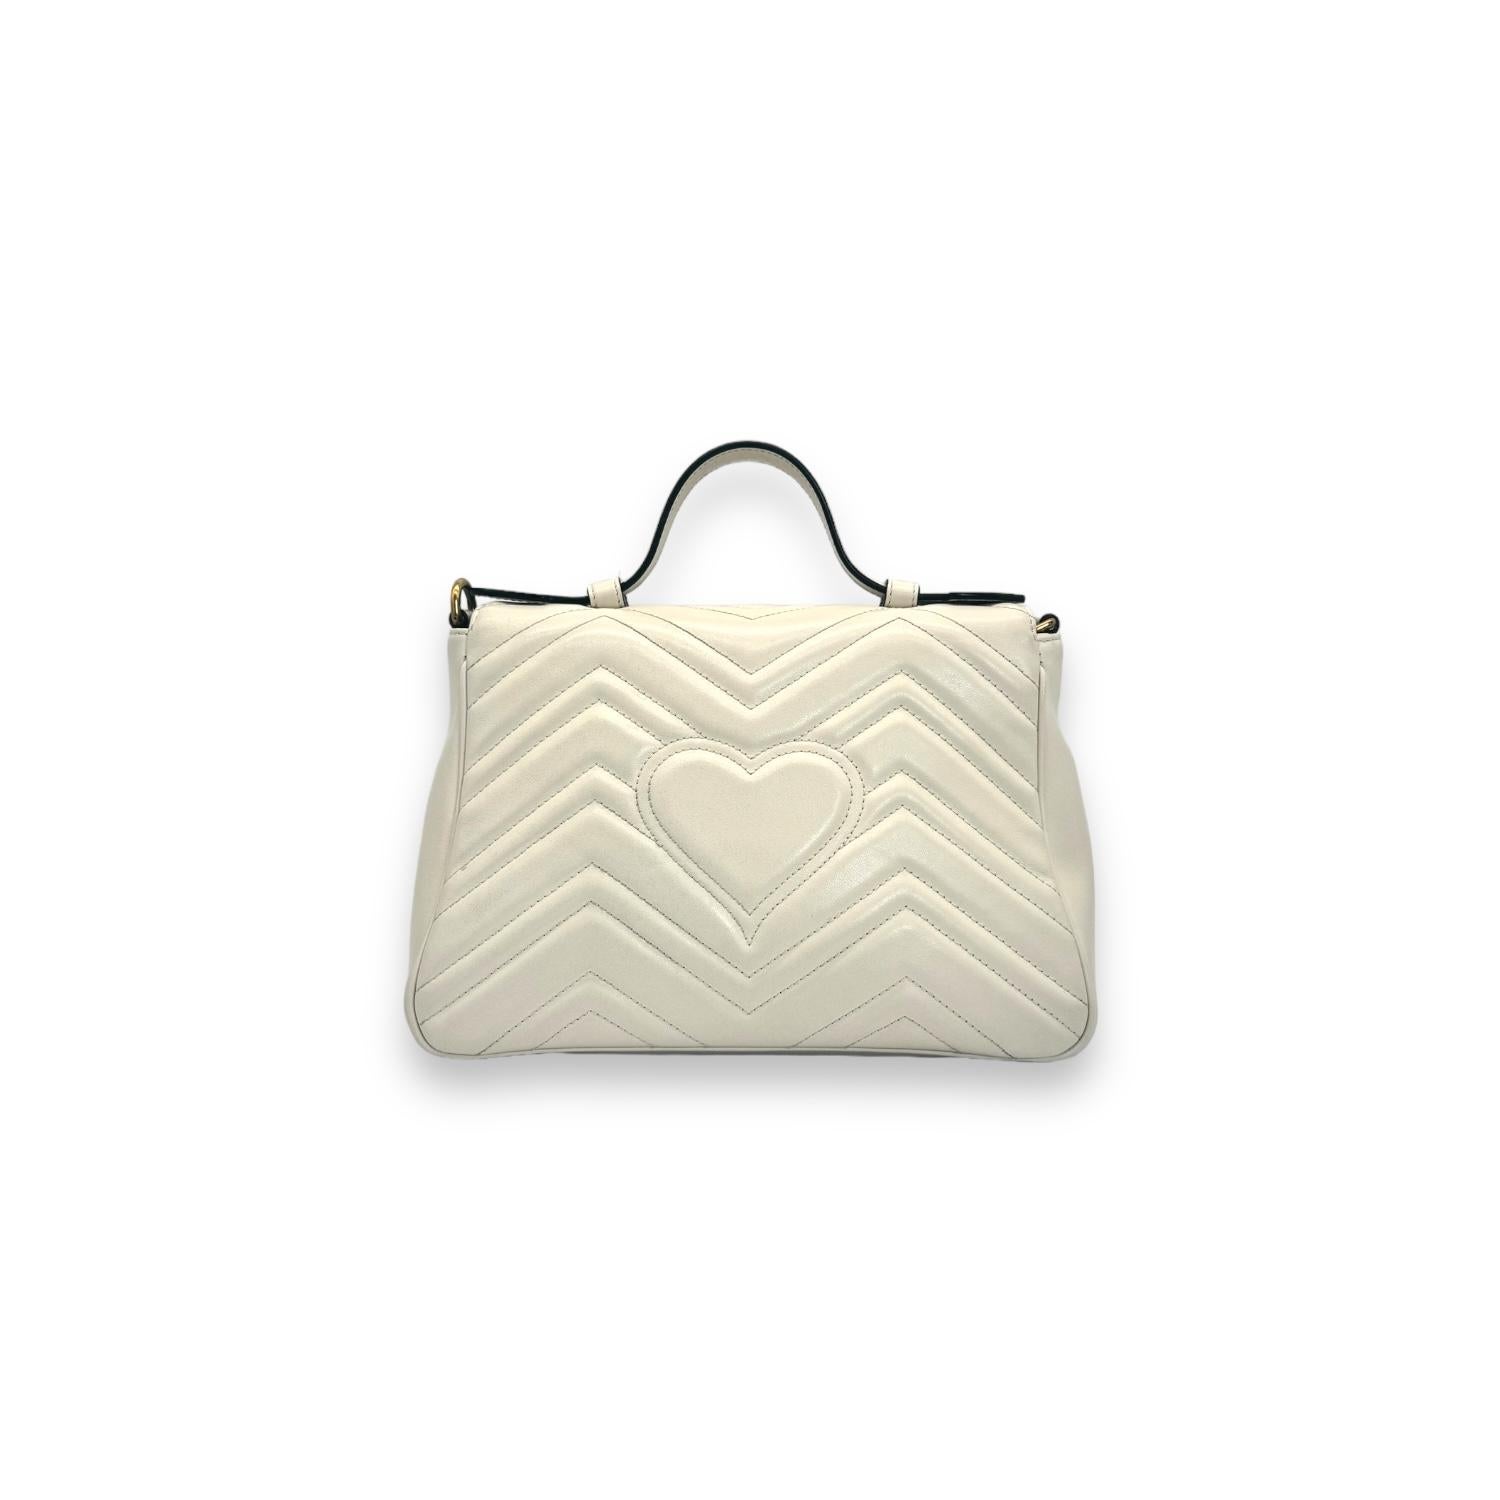 Experience luxury and style with the Gucci GG Marmont Top Handle Small Crossbody Bag. Made in Italy with white matelassé chevron leather and antique gold-tone hardware, this versatile bag exudes elegance. It features a push snap closure at the